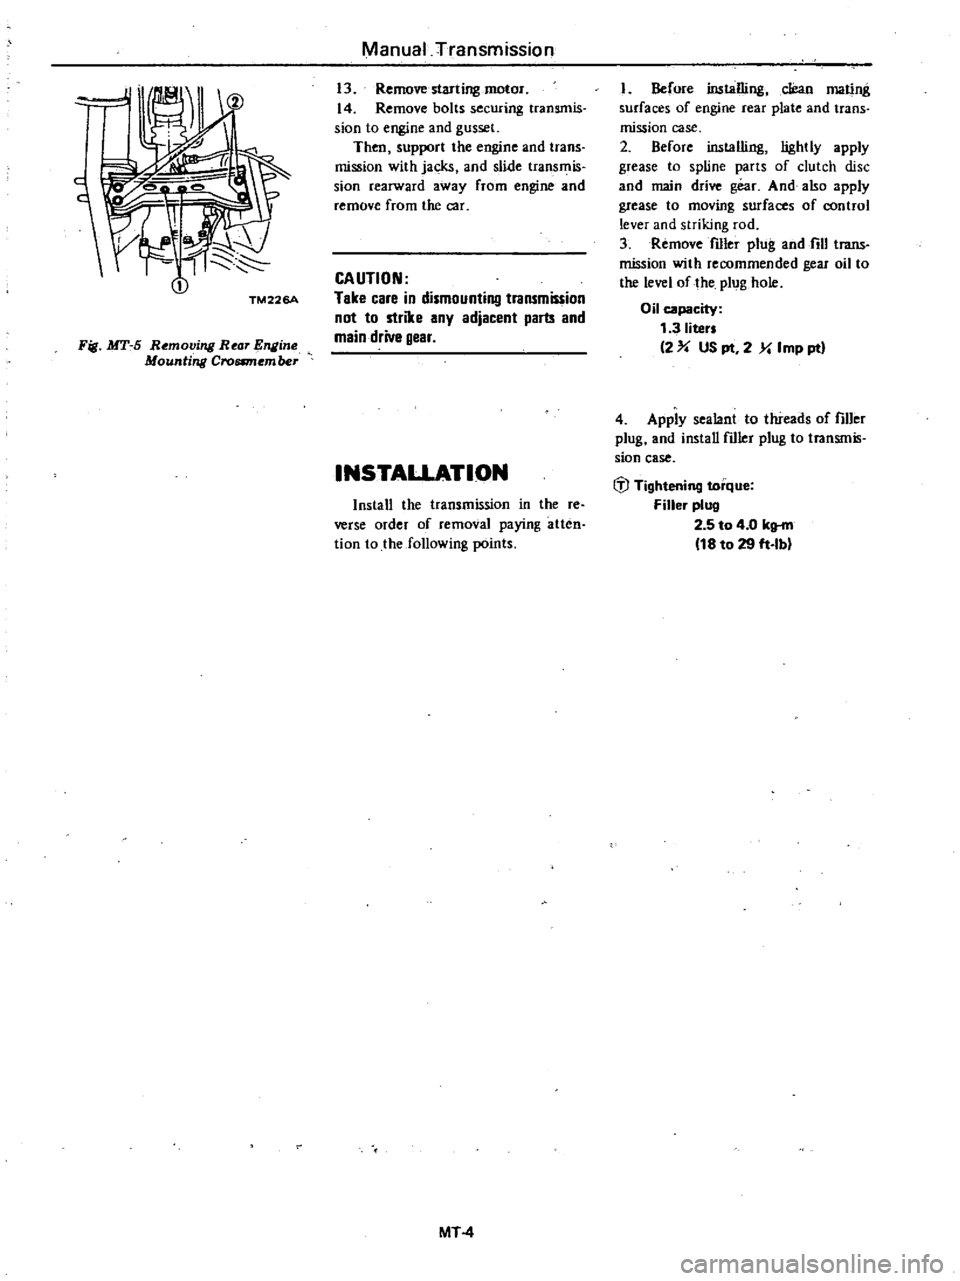 DATSUN 210 1979  Service Manual 
Fig 
MT 
5

Removing 
Rear

1IIline

Mounting 
Croamember 
Manual

Transmission

13

Remove

starling 
motor

14 
Remove 
bolts

securing 
transmis

sion 
to

engine 
and

gusset

Then

support 
the
